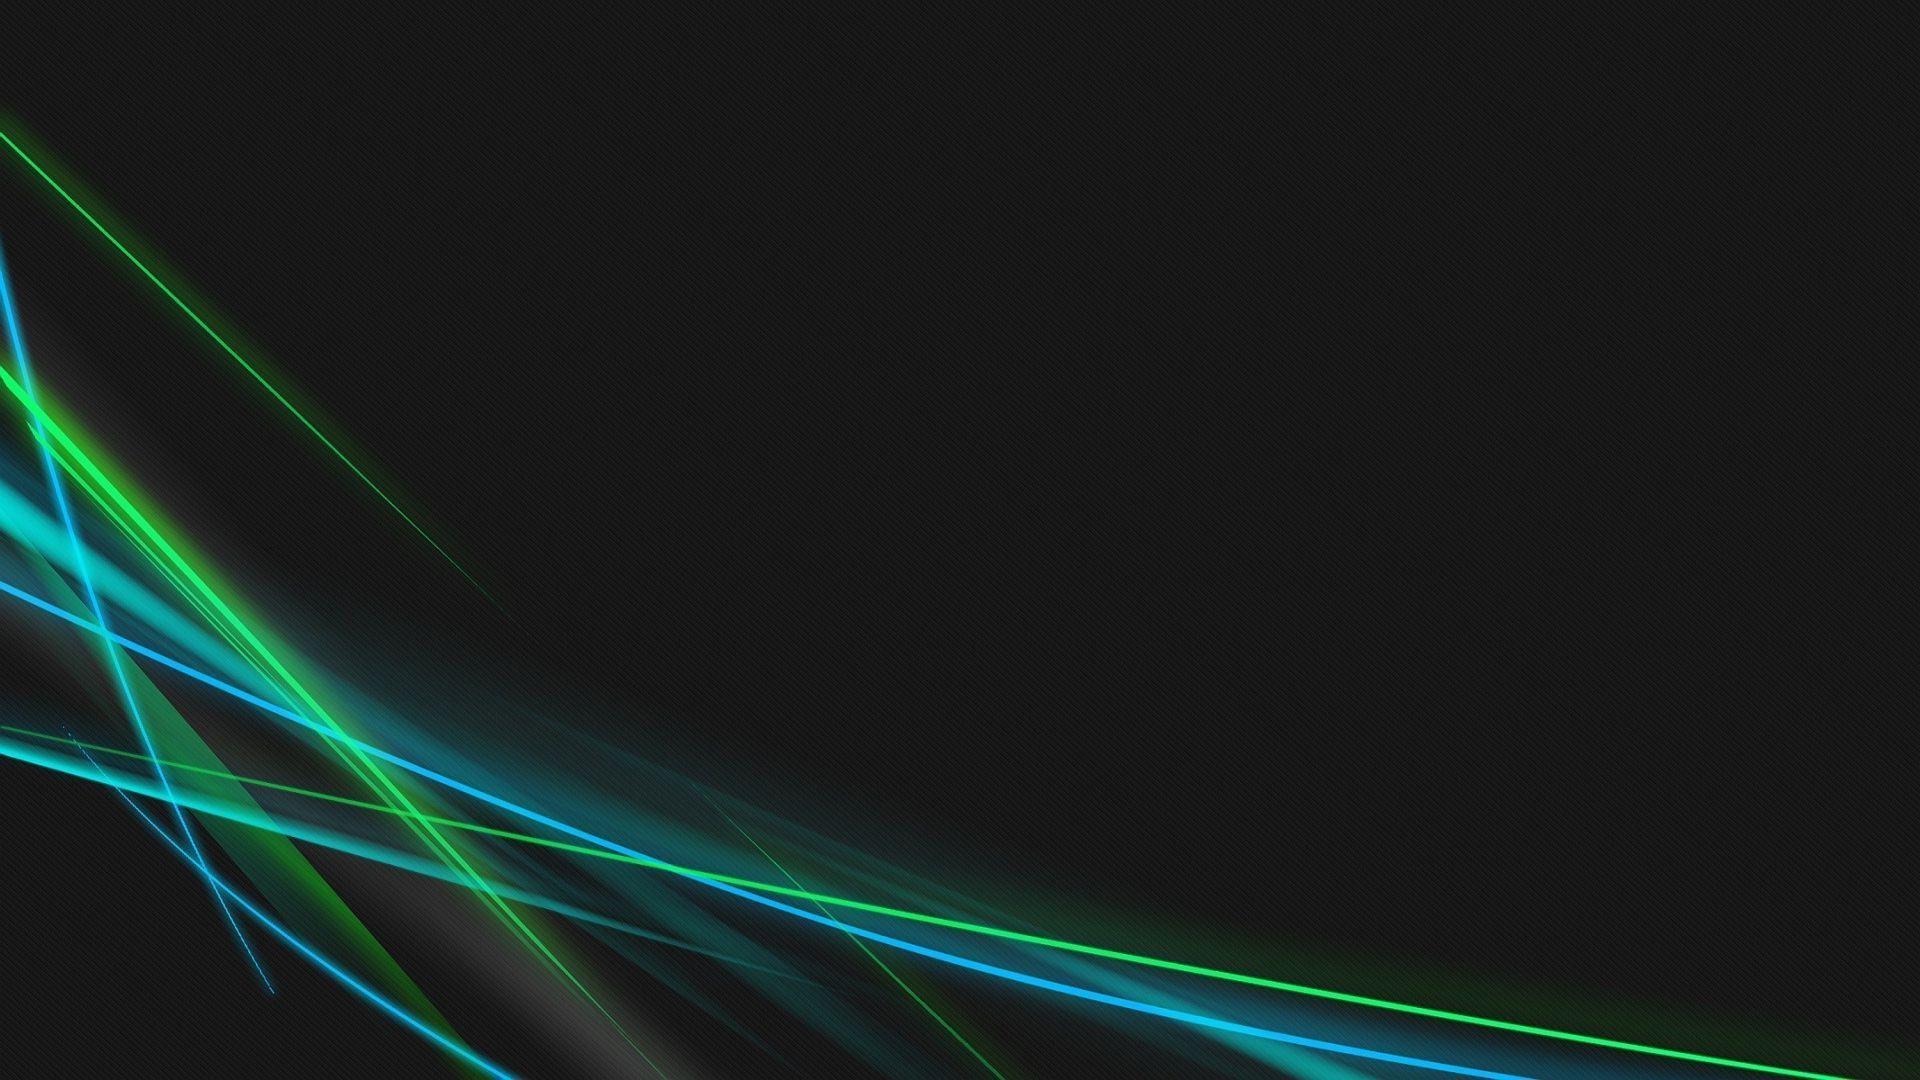 Wallpaper For > Black And Neon Green Wallpaper